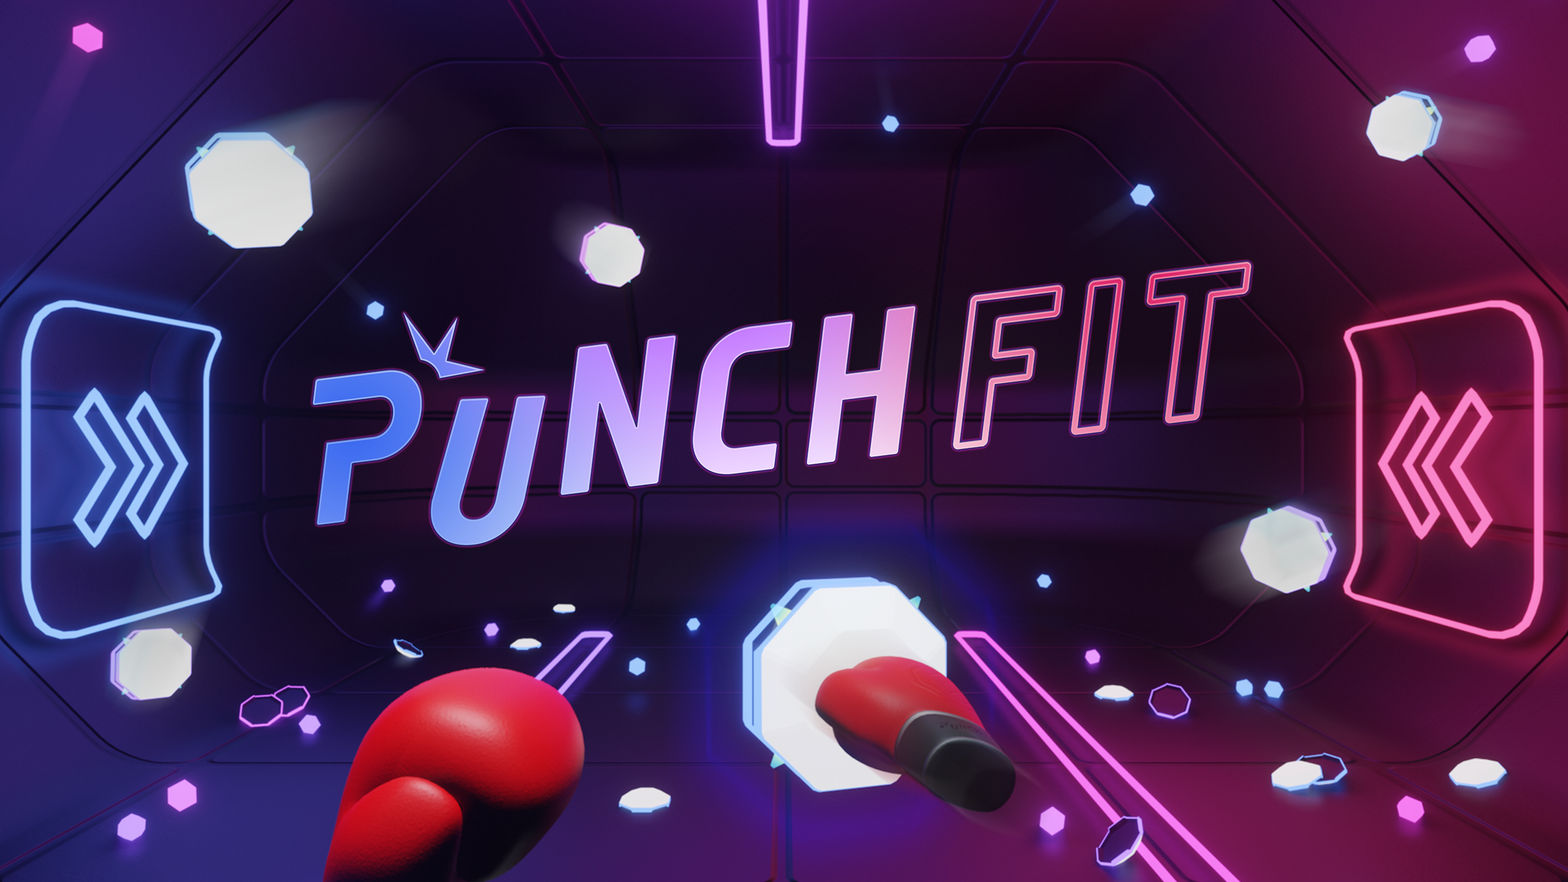 PUNCH FIT